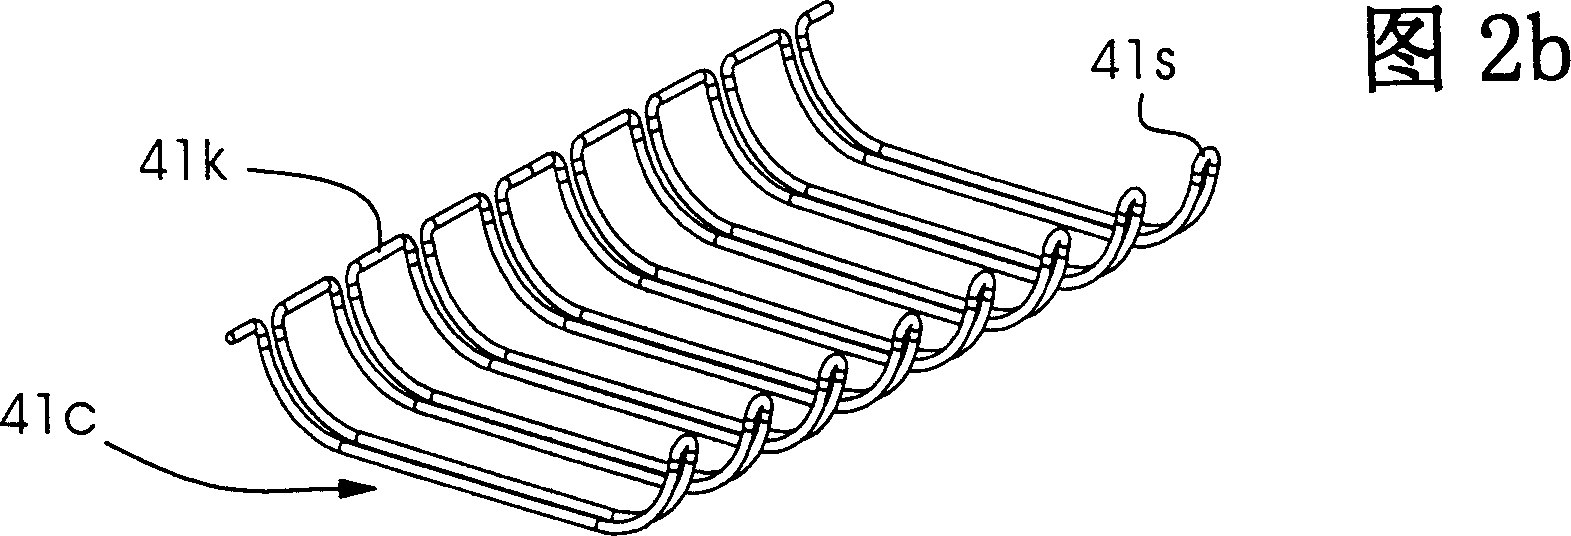 Method for bending metal wire comb-like form binding element